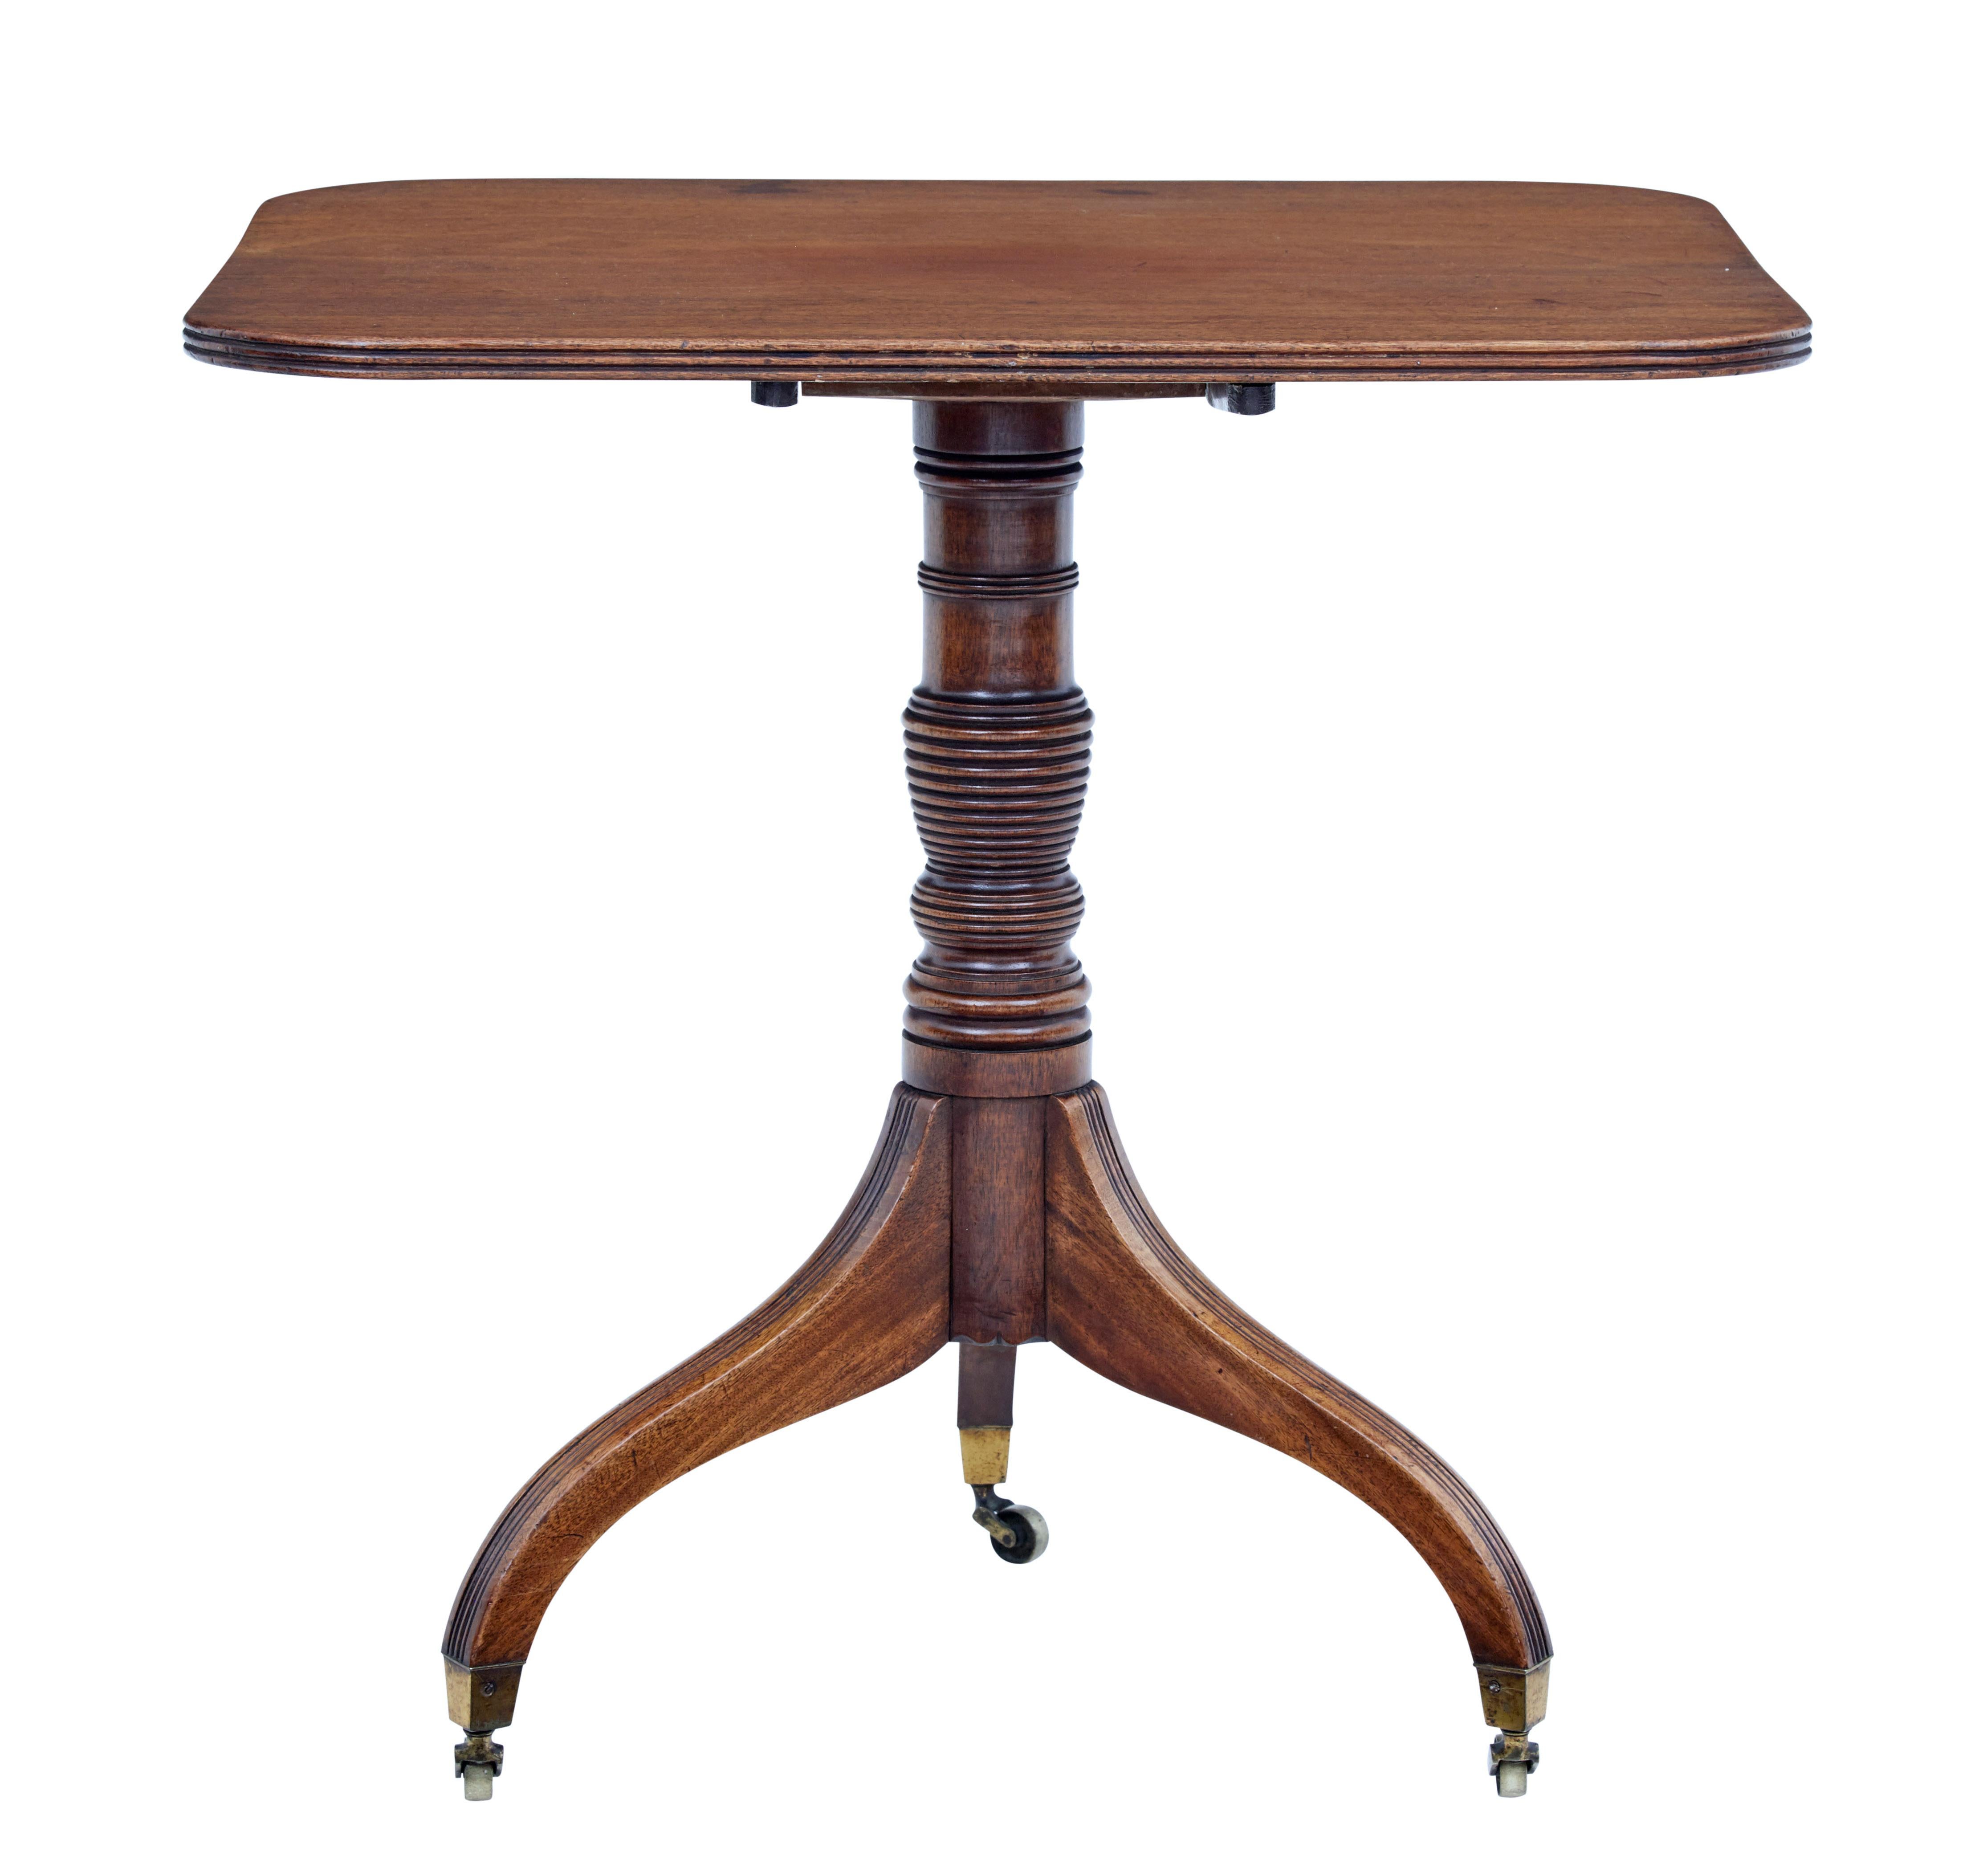 English 19th century table, circa 1880.

Rectangular top with reeded edge, tilting top mechanism. Turned stem, standing on 3 legs with brass castors.

Ideal for use as a lamp table or behind a free standing sofa.

Some staining and natural